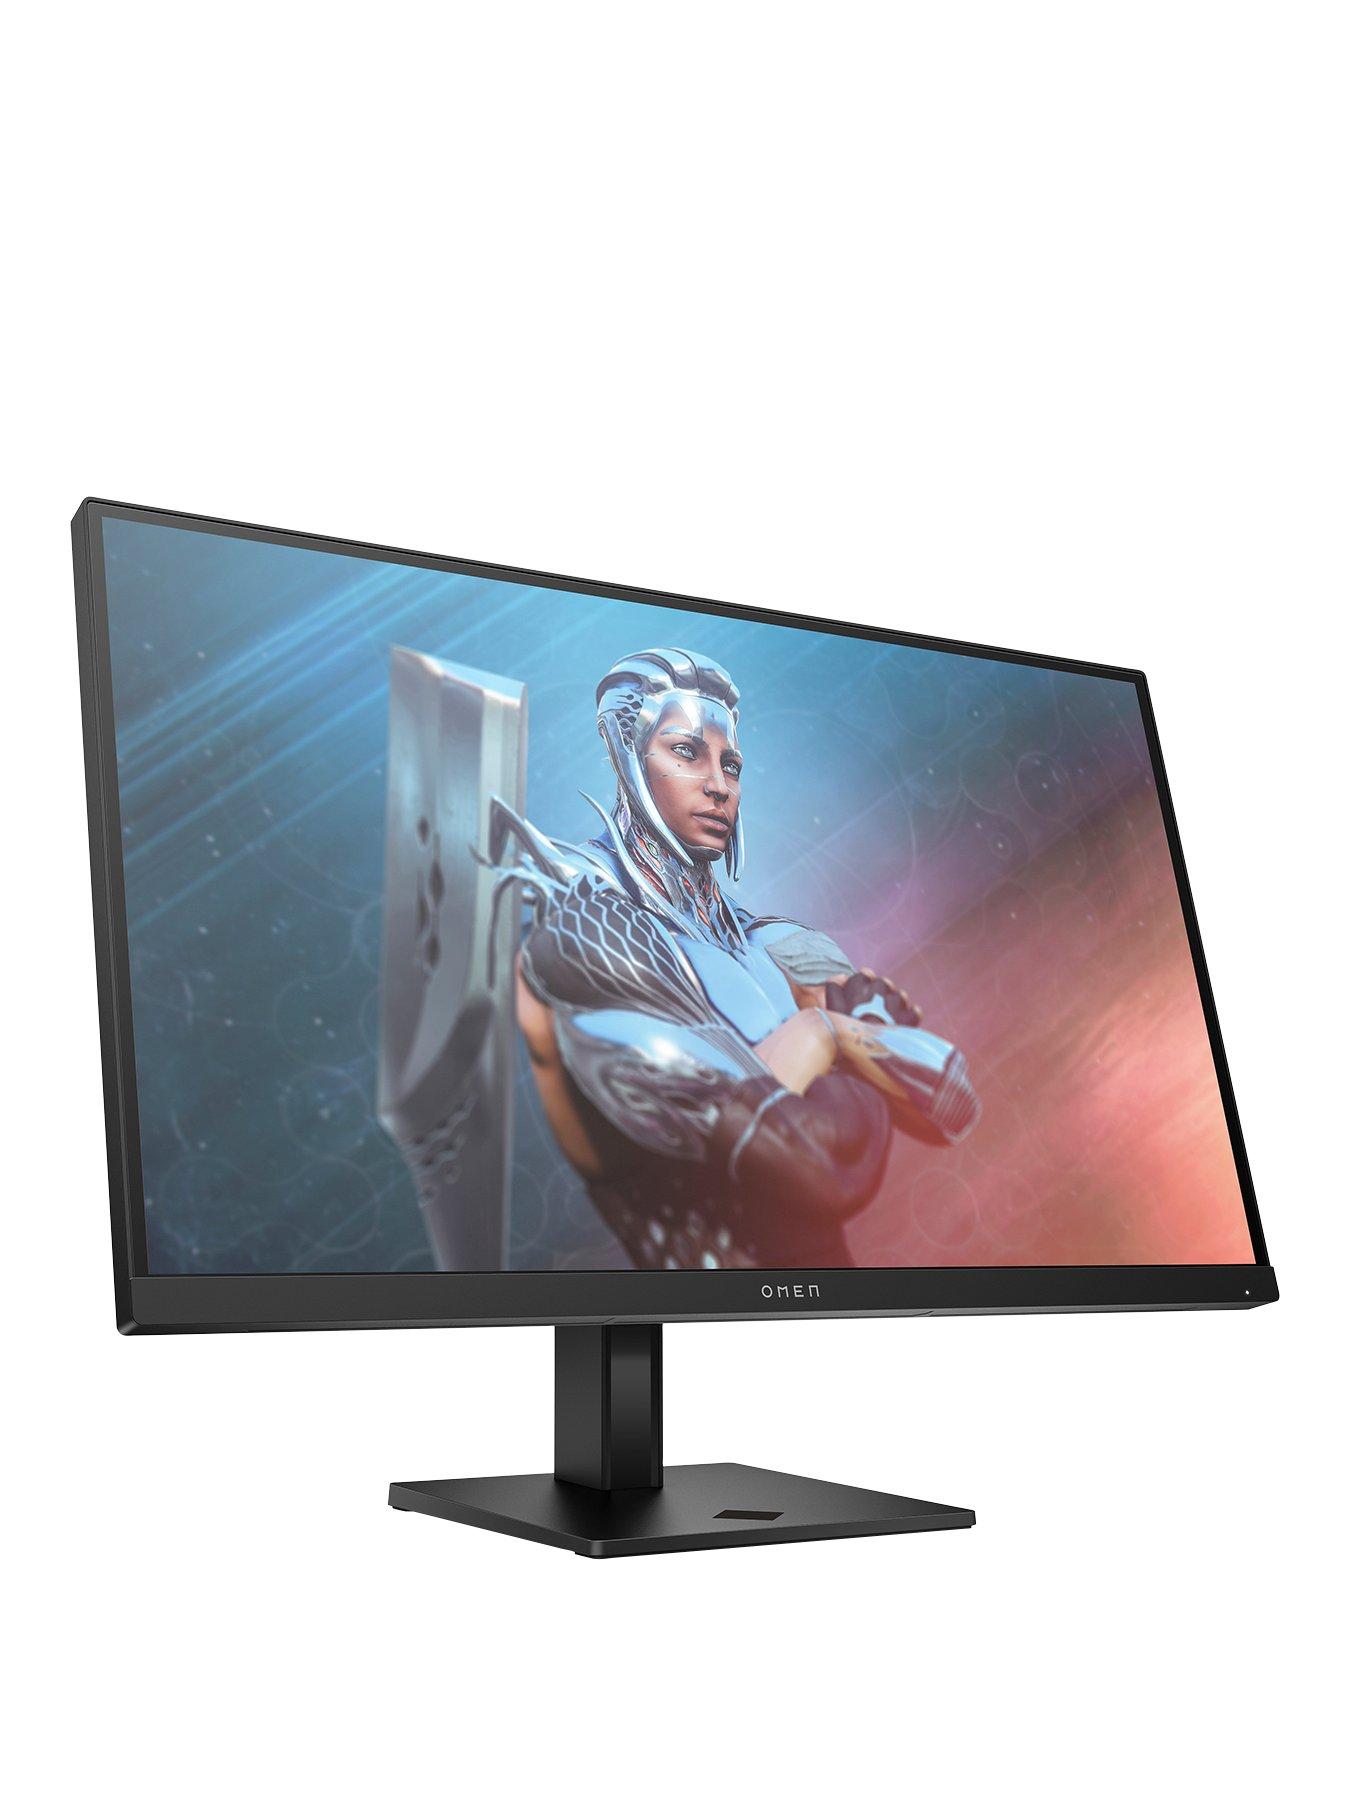 HP Omen 34c 165 Hz Gaming Monitor Review: Smooth Performance and